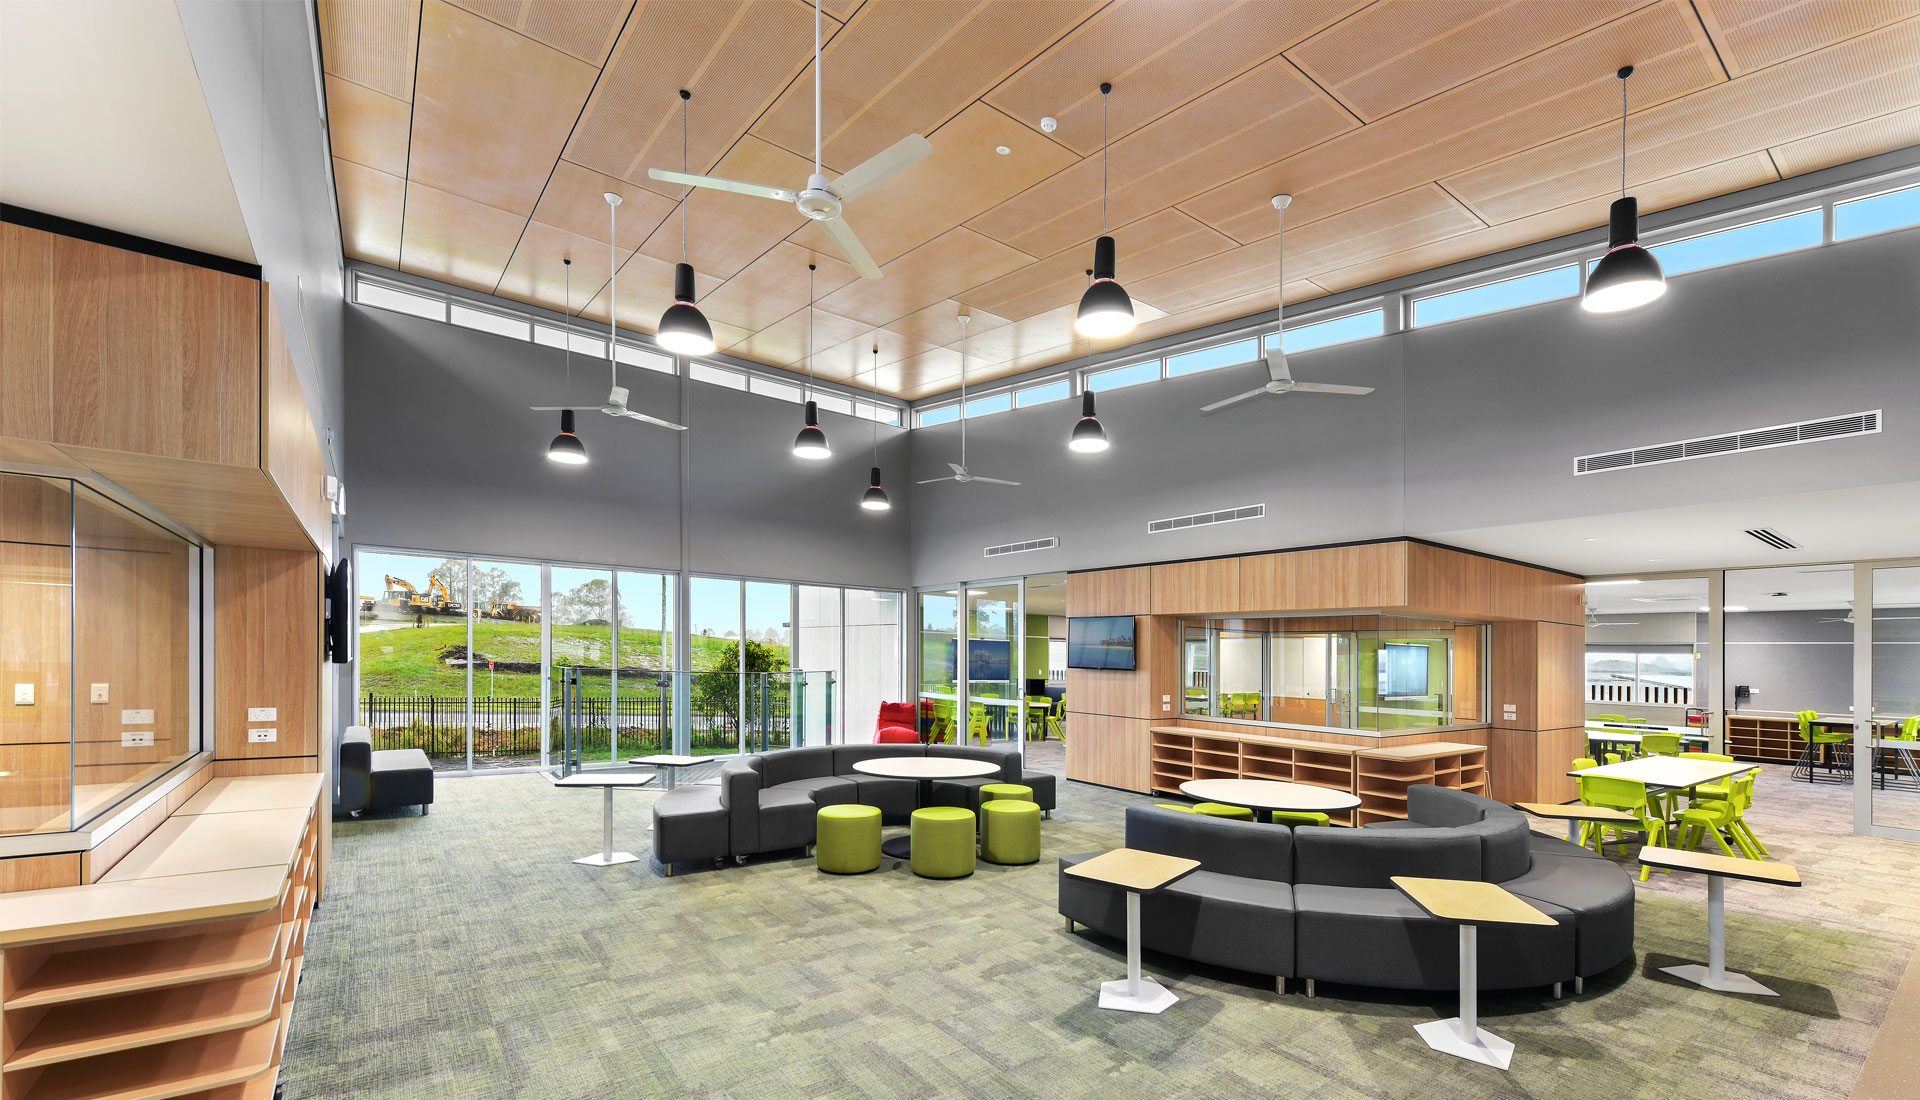 Acoustic mdf plywood ceiling tiles panels designed by keystonelinings